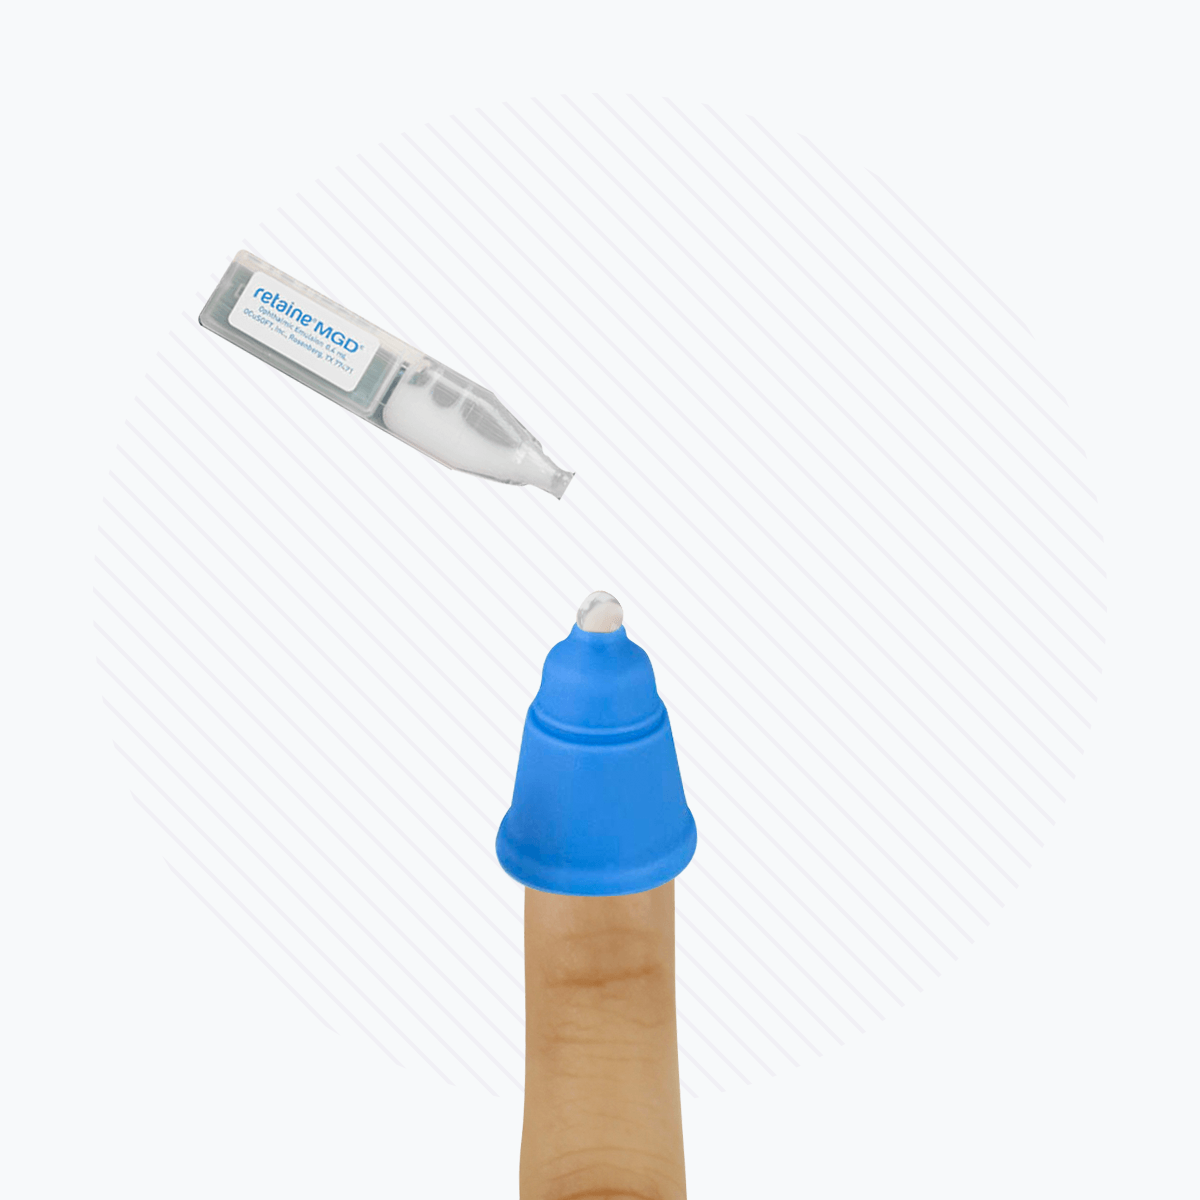 Ocusoft Retaine MGD with Magic Touch Easy Drop Applicator - DryEye Rescue Store